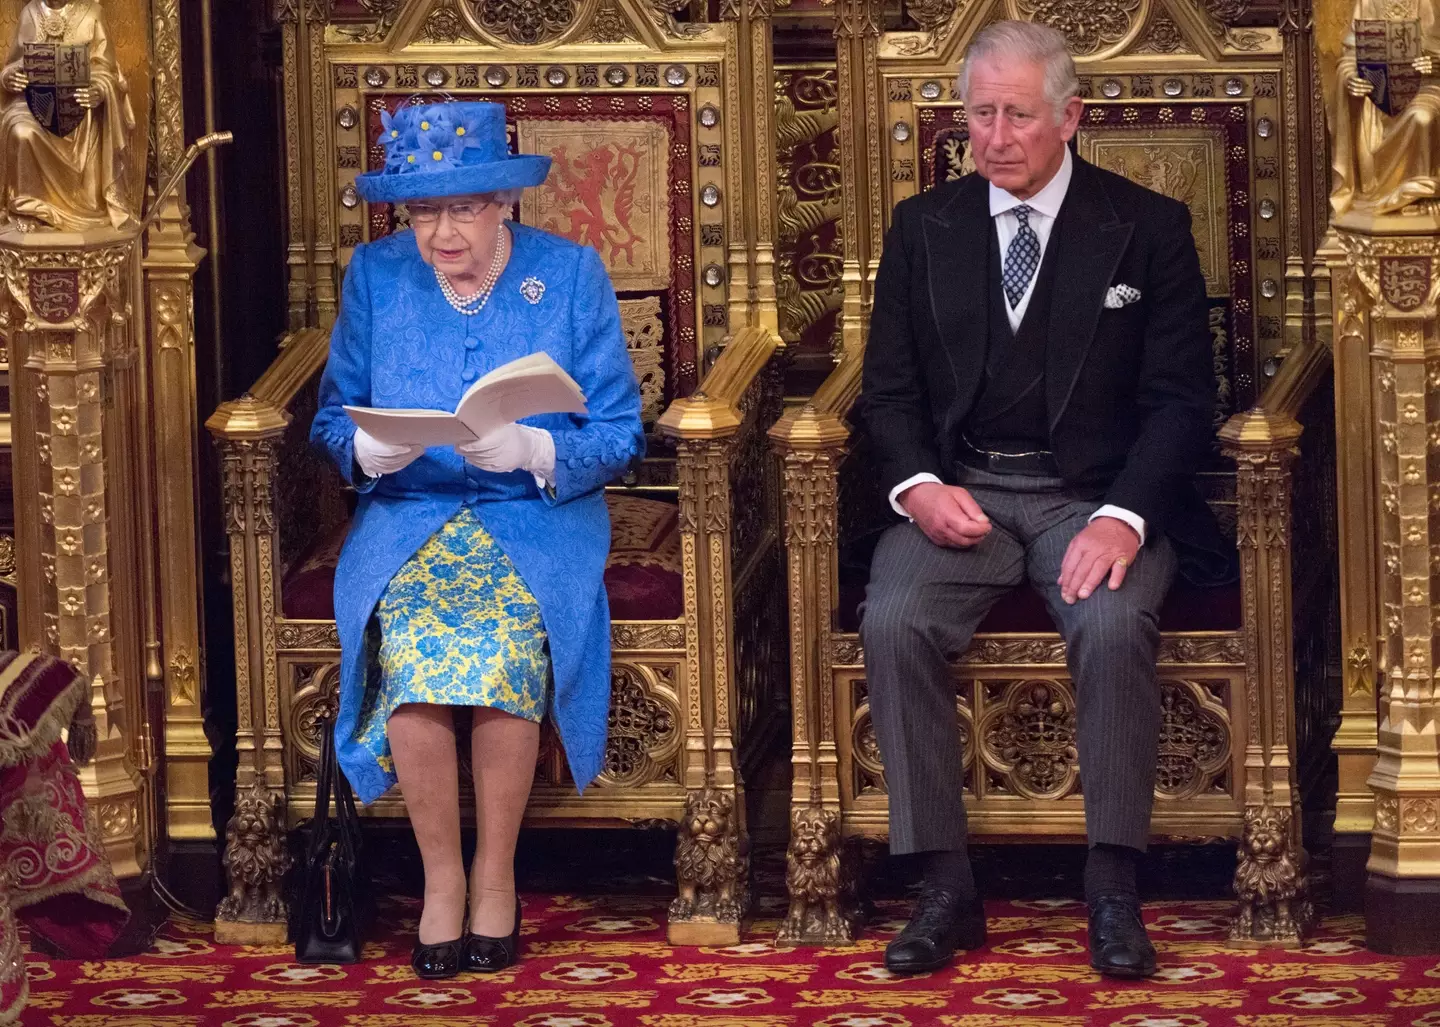 The Queen at the Palace of Westminster in London in 2017 with the now King Charles III.